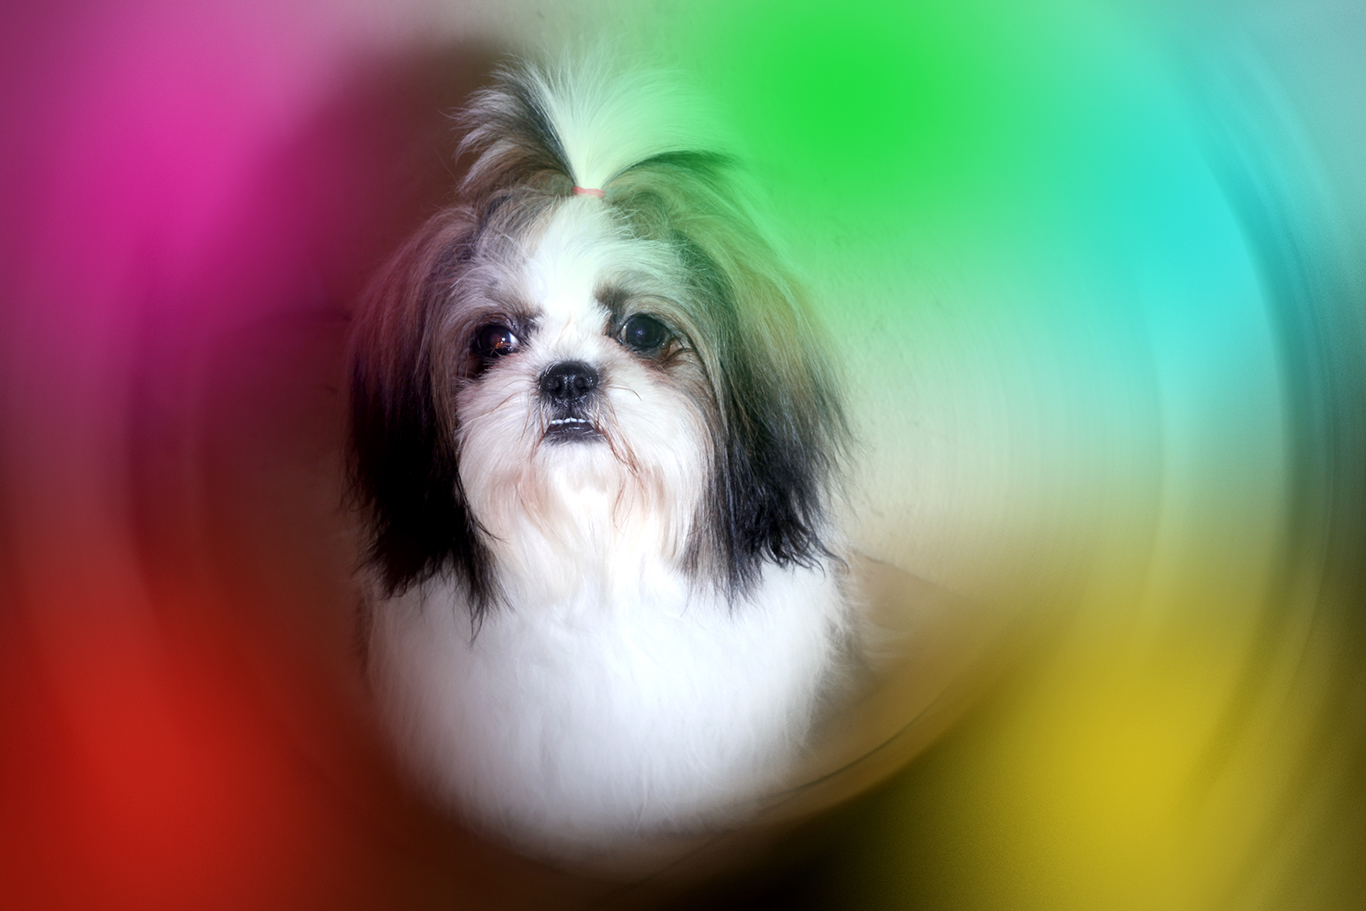 Shih tzu pets for mating we have 4 males for mating